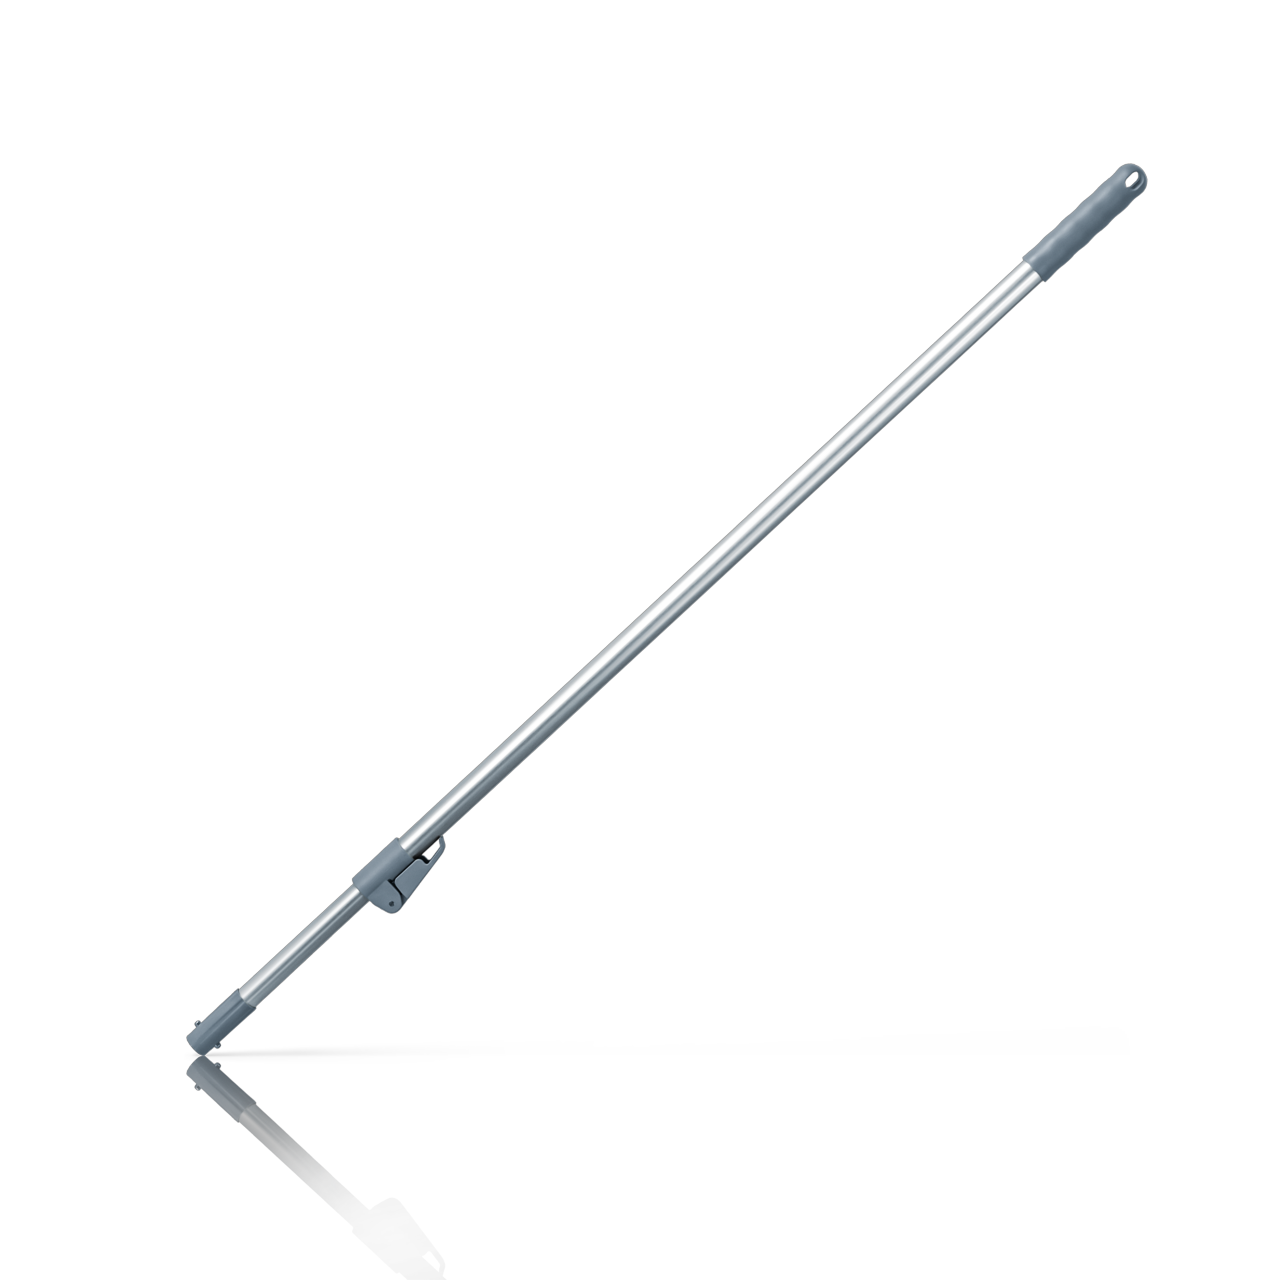 Stainless steel telescopic handle CR ultra